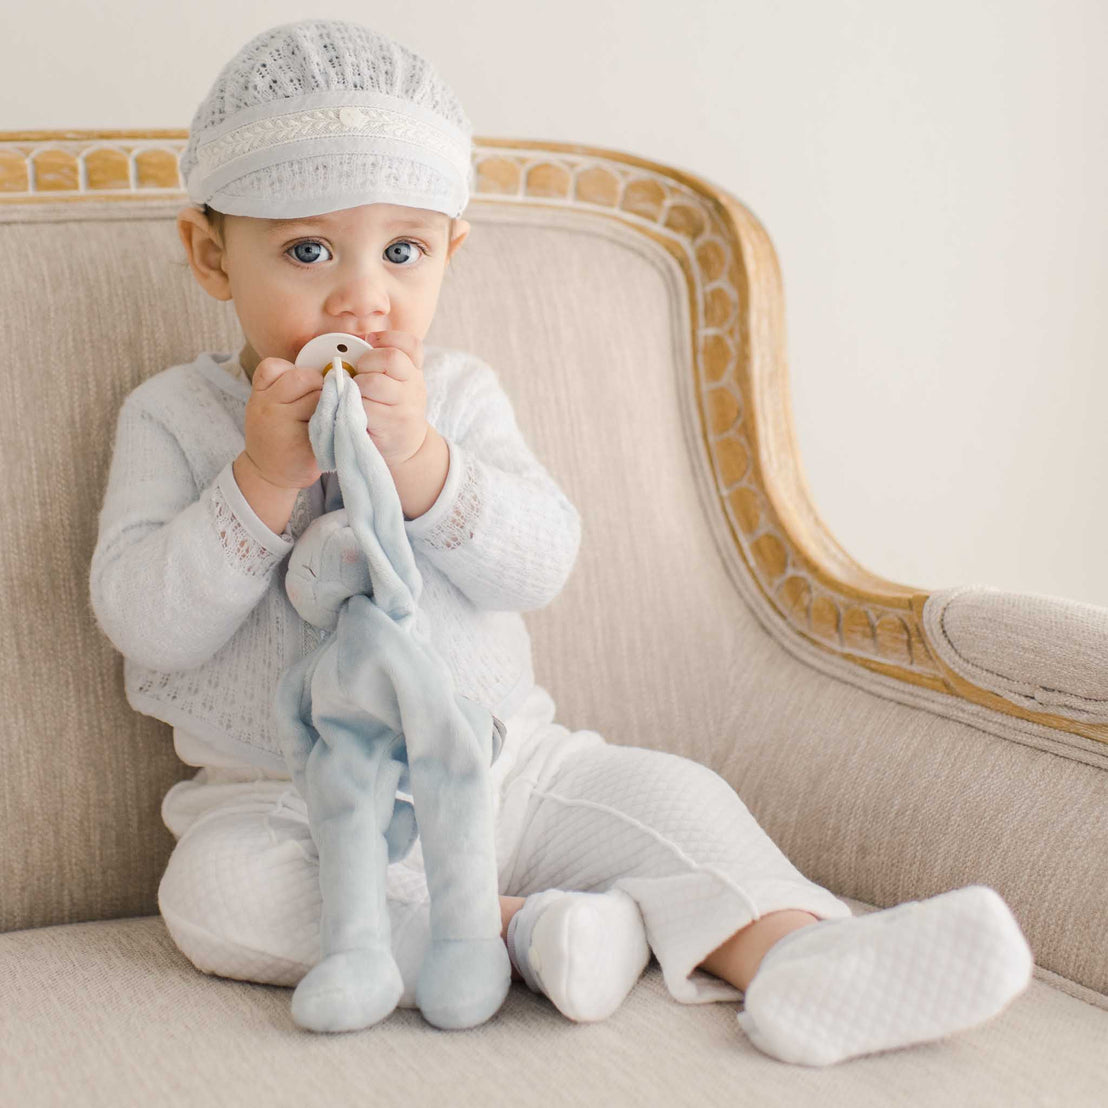 Baby boy sitting on a chair and wearing a Harrison 3-piece pant suit and matching blue knit sweater. He is holding a blue bunny stuffed animal pacifier holder